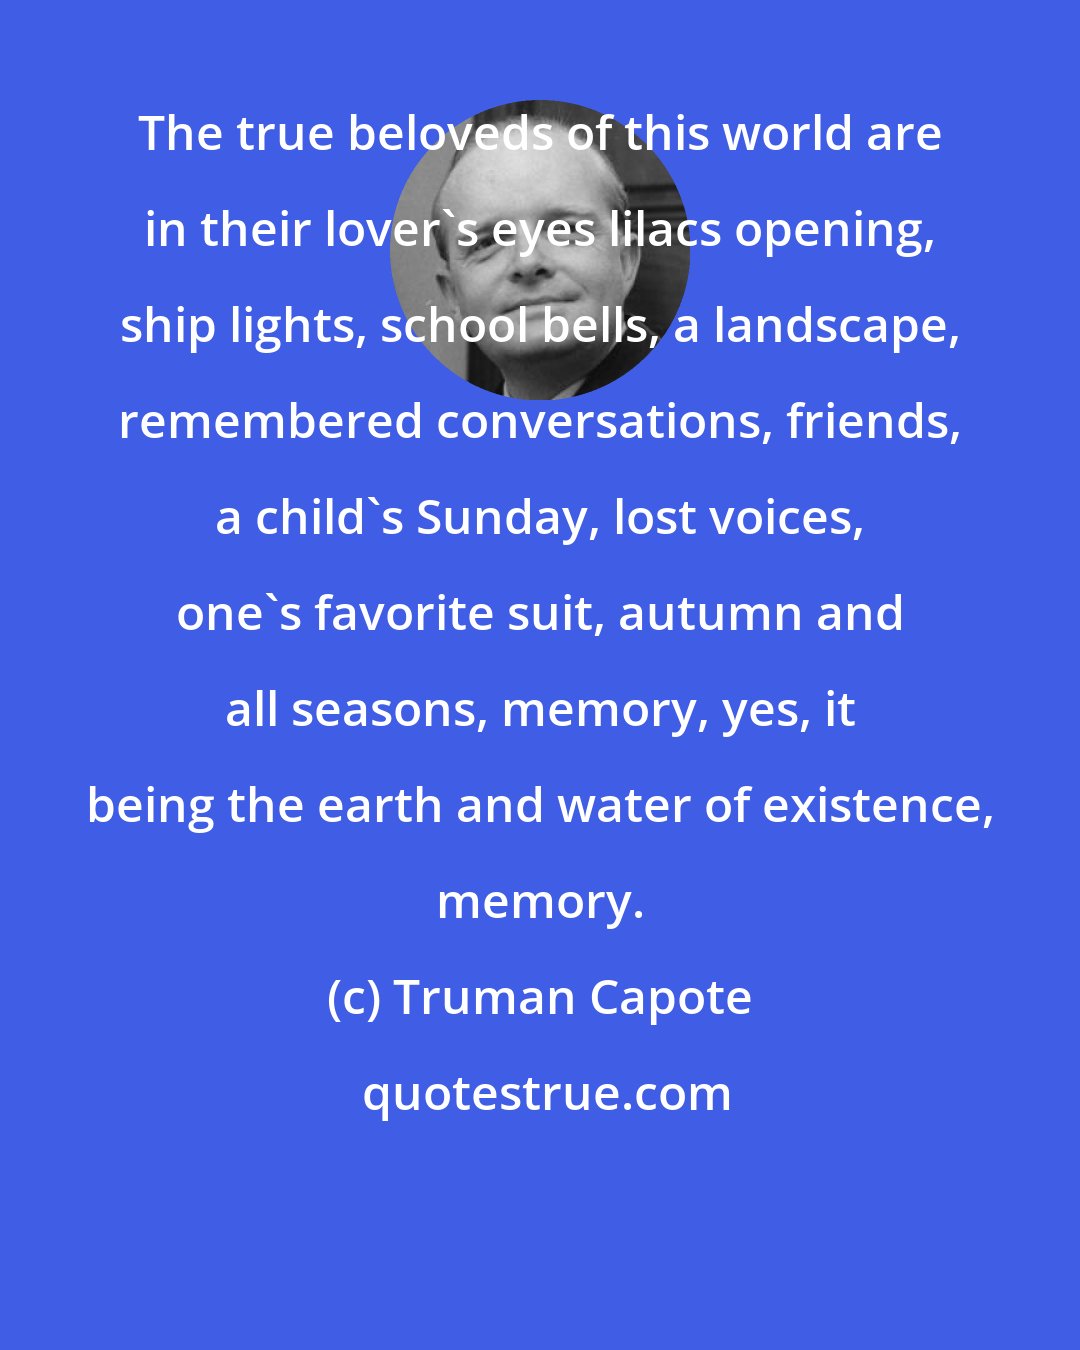 Truman Capote: The true beloveds of this world are in their lover's eyes lilacs opening, ship lights, school bells, a landscape, remembered conversations, friends, a child's Sunday, lost voices, one's favorite suit, autumn and all seasons, memory, yes, it being the earth and water of existence, memory.